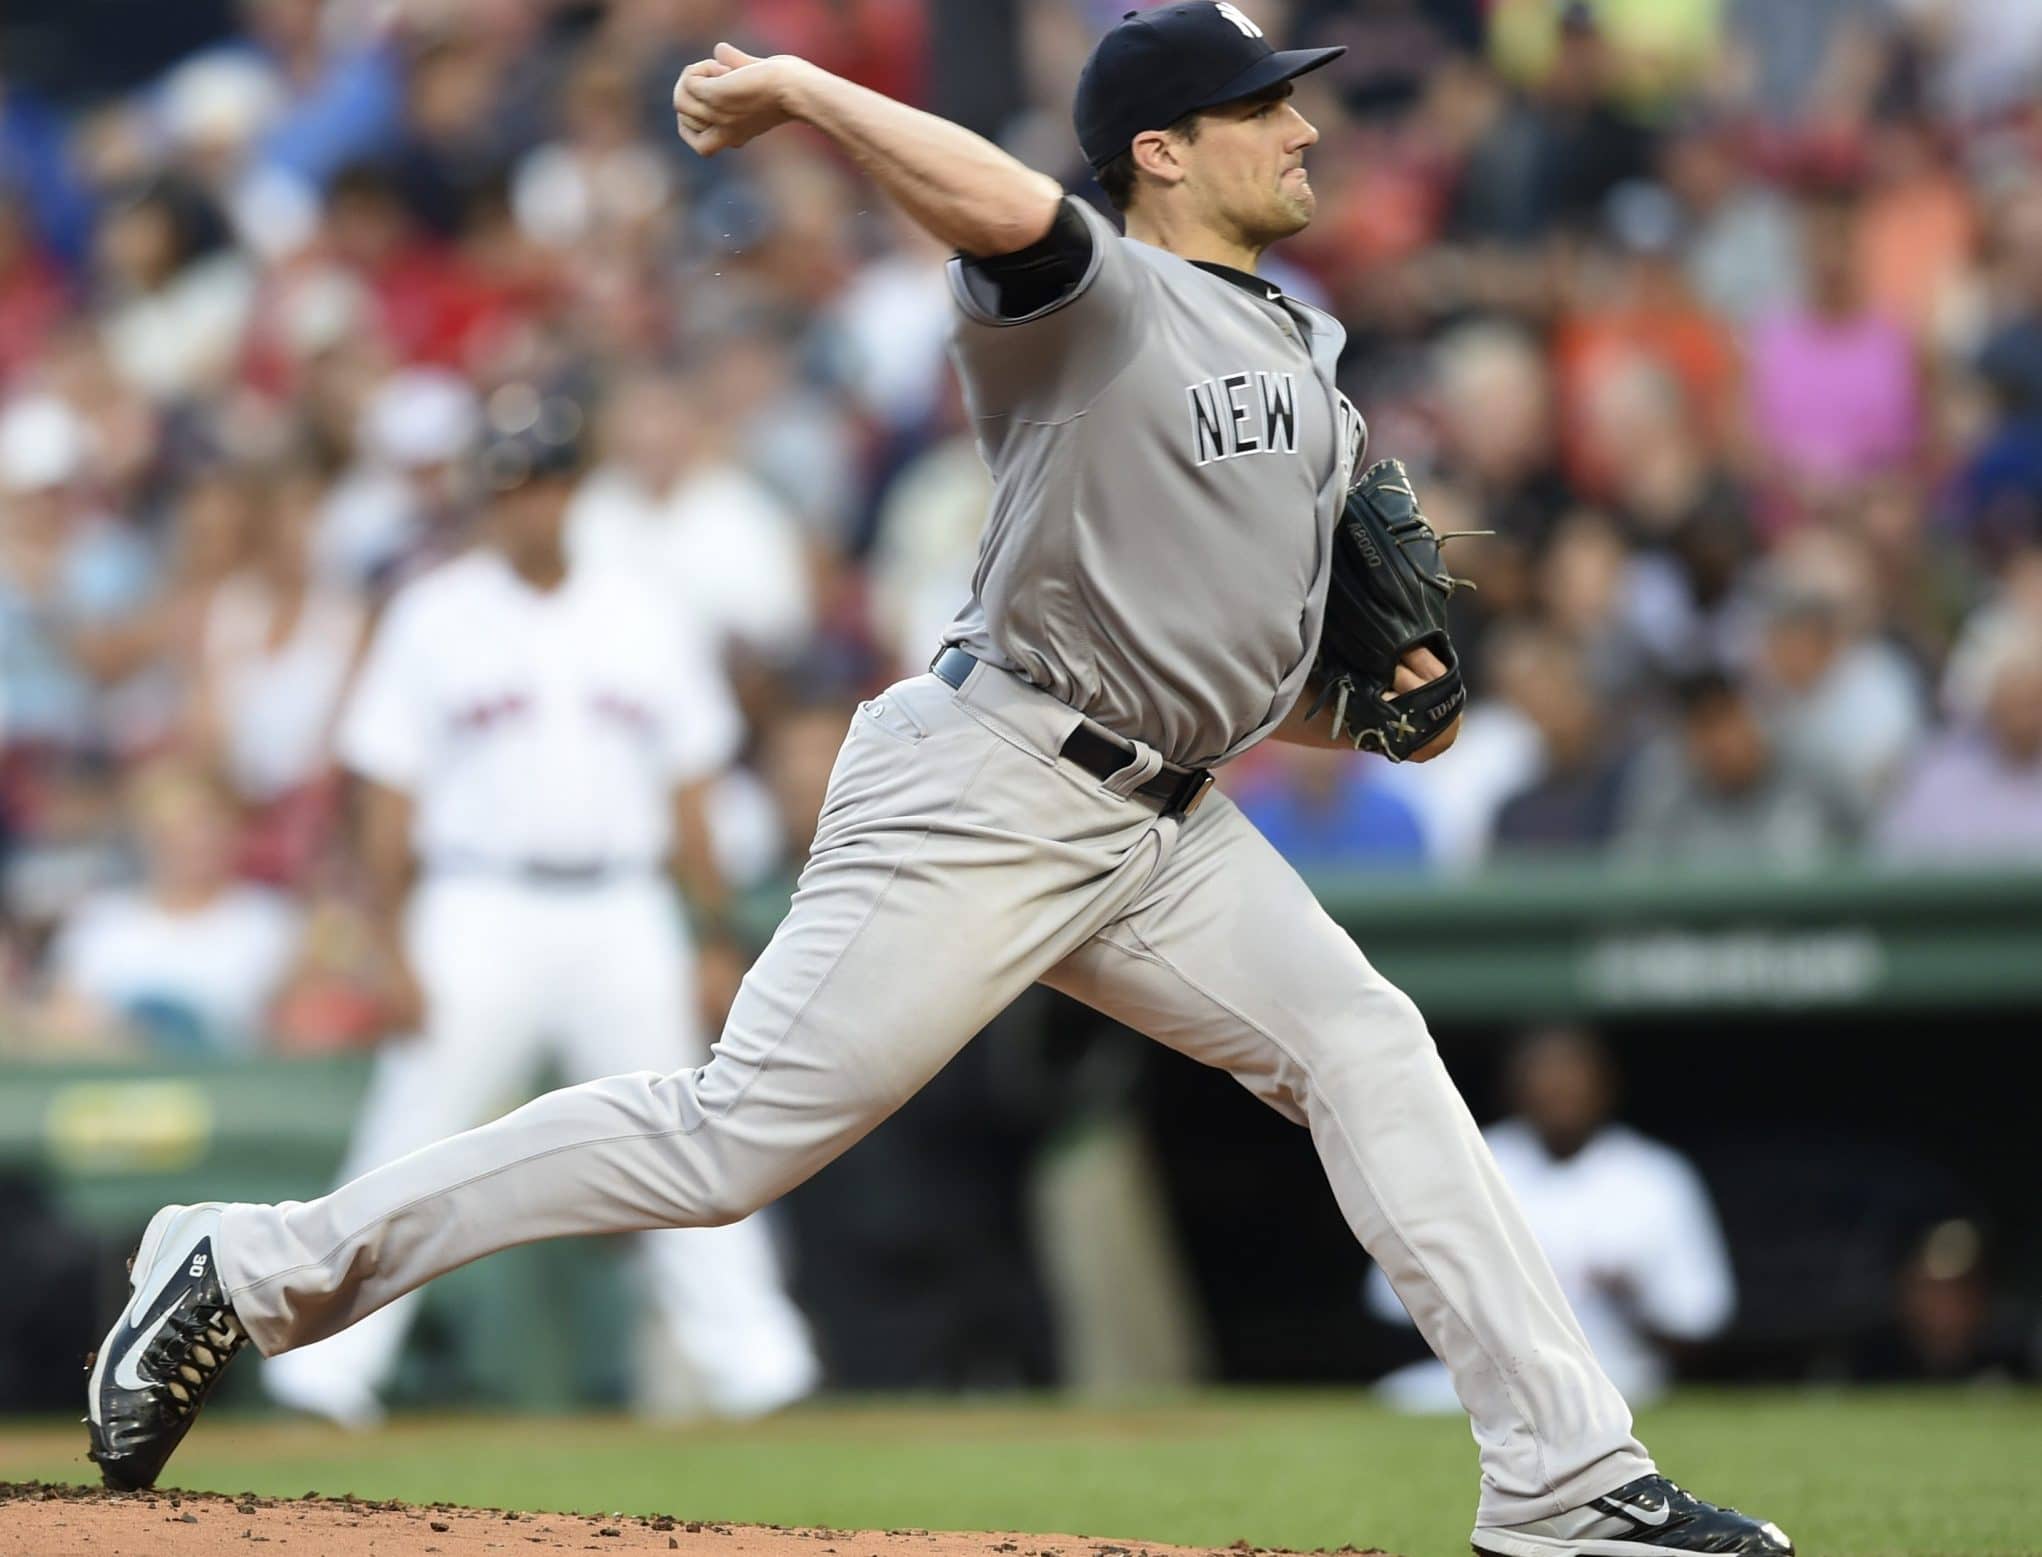 New York Yankees: Nathan Eovaldi Placed on 15-Day DL; Severino Recalled  